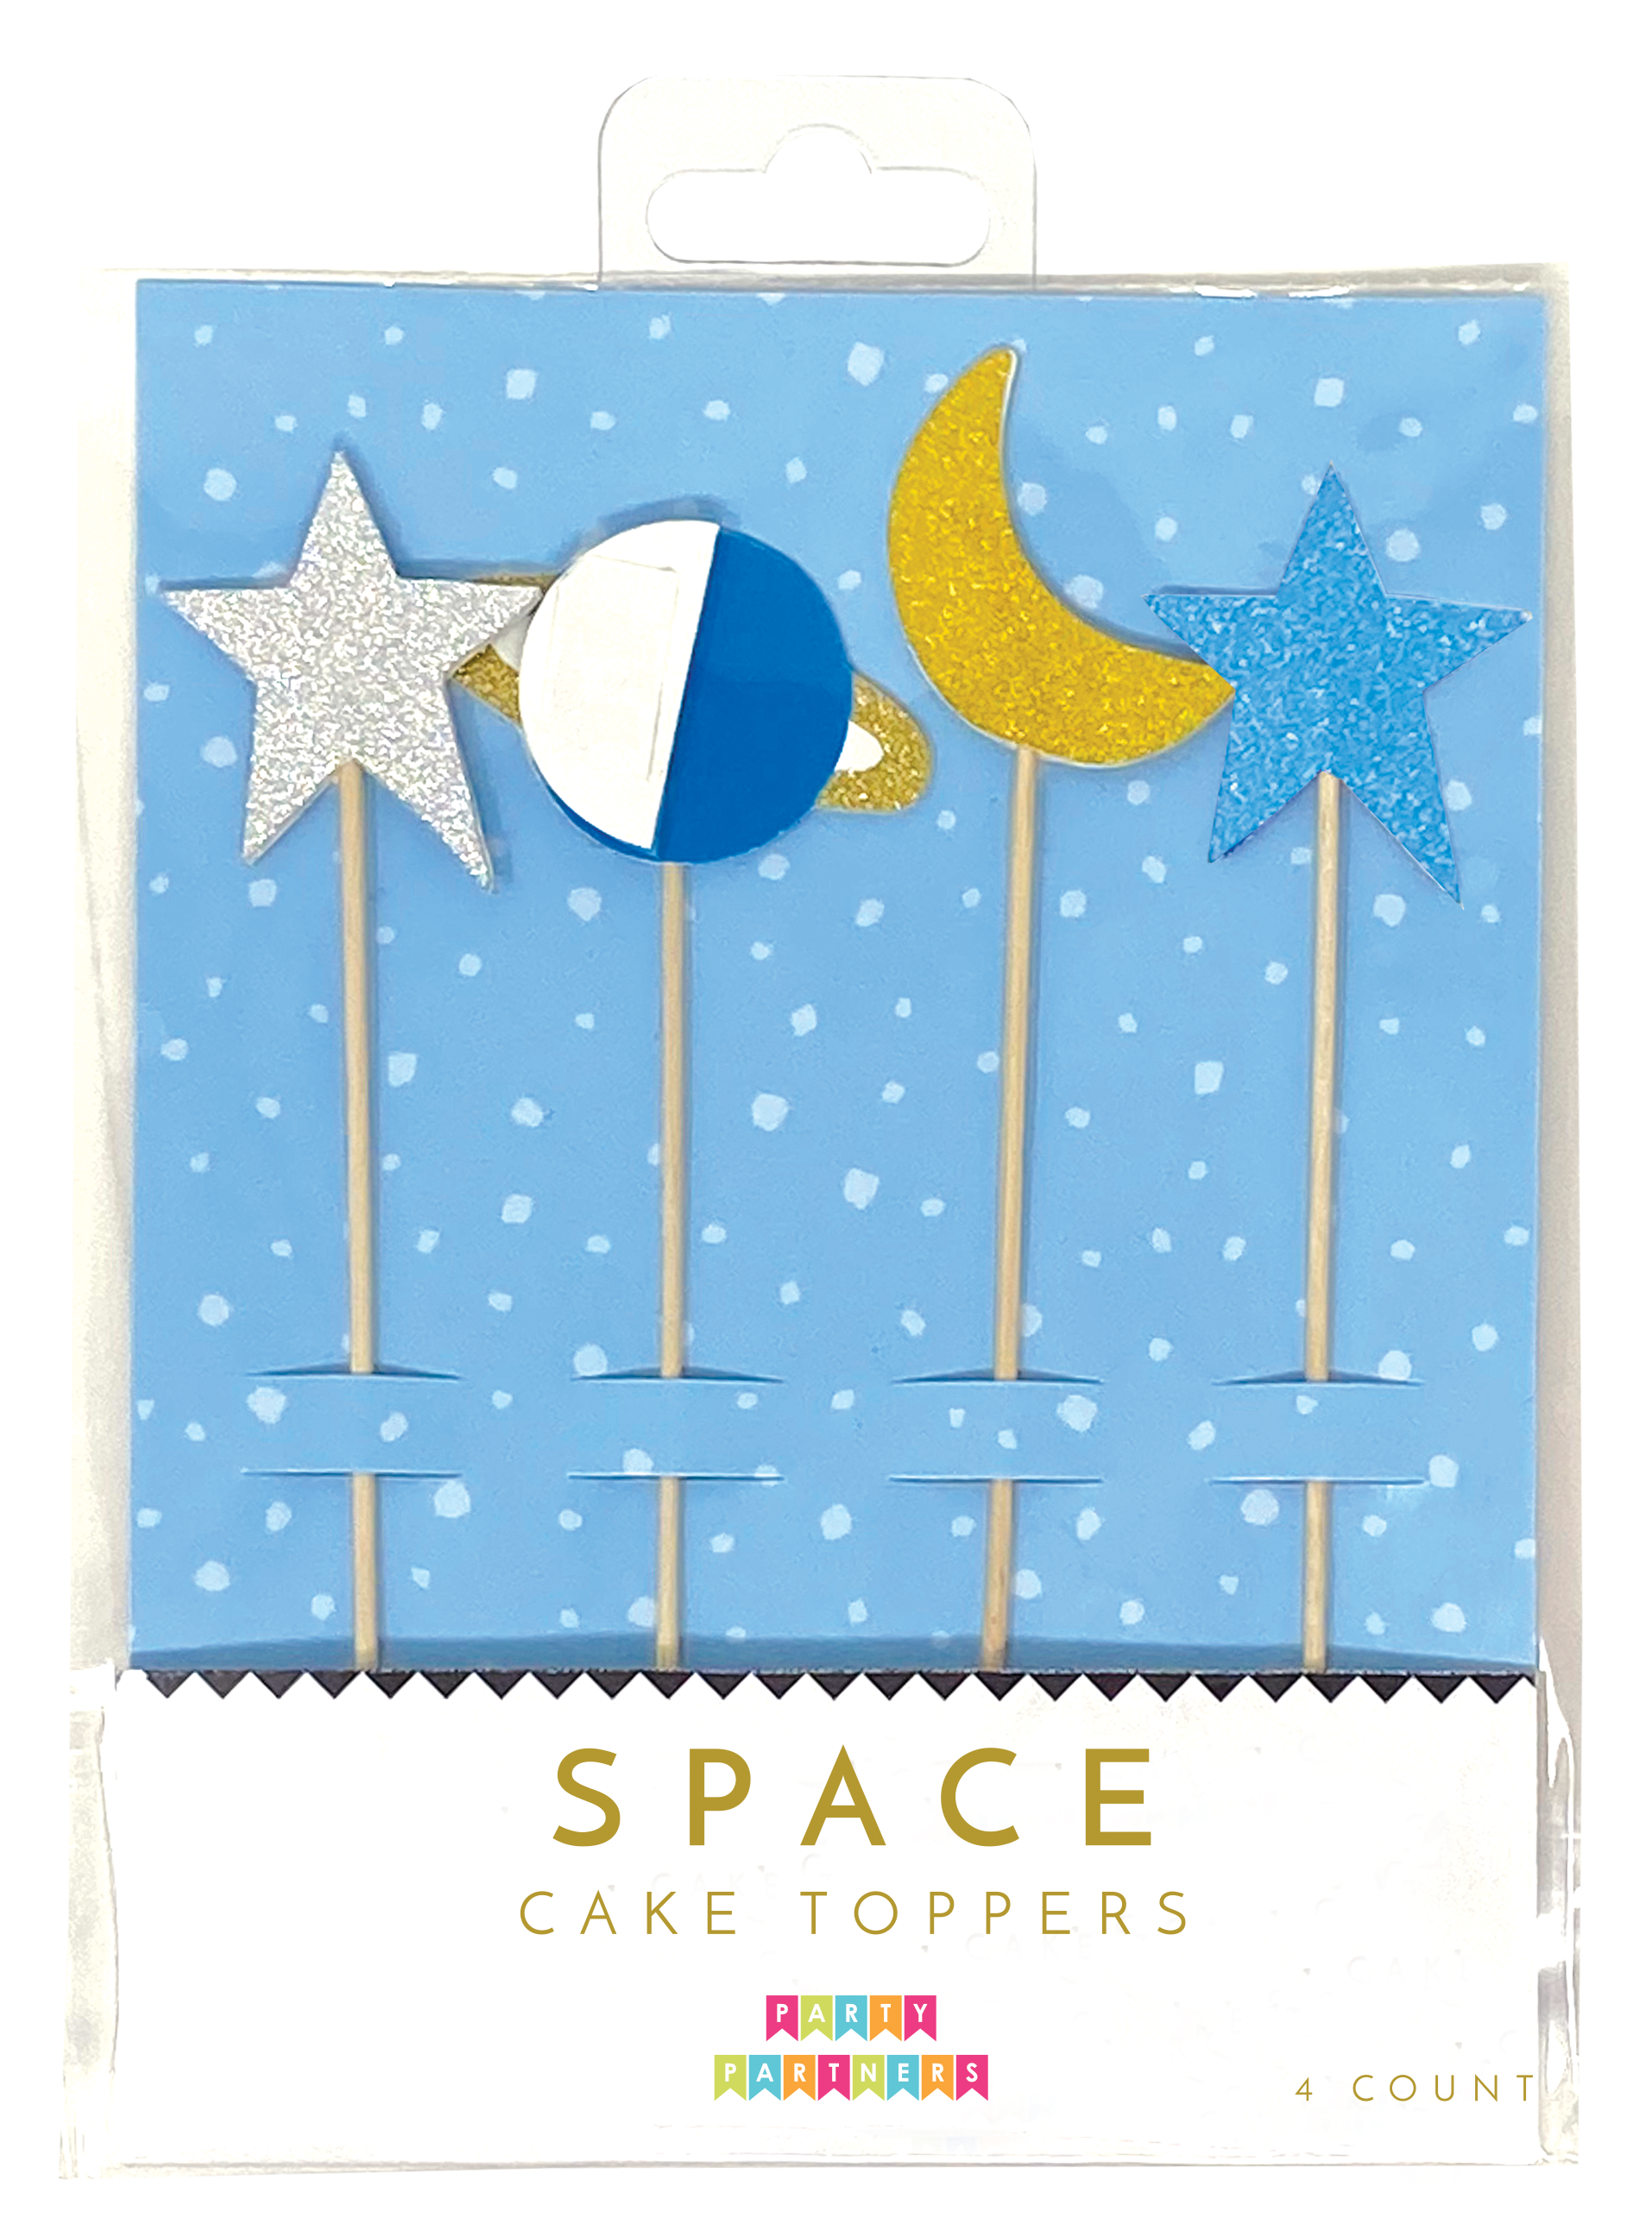 Space Cake Topper Party Partners - Cardmore